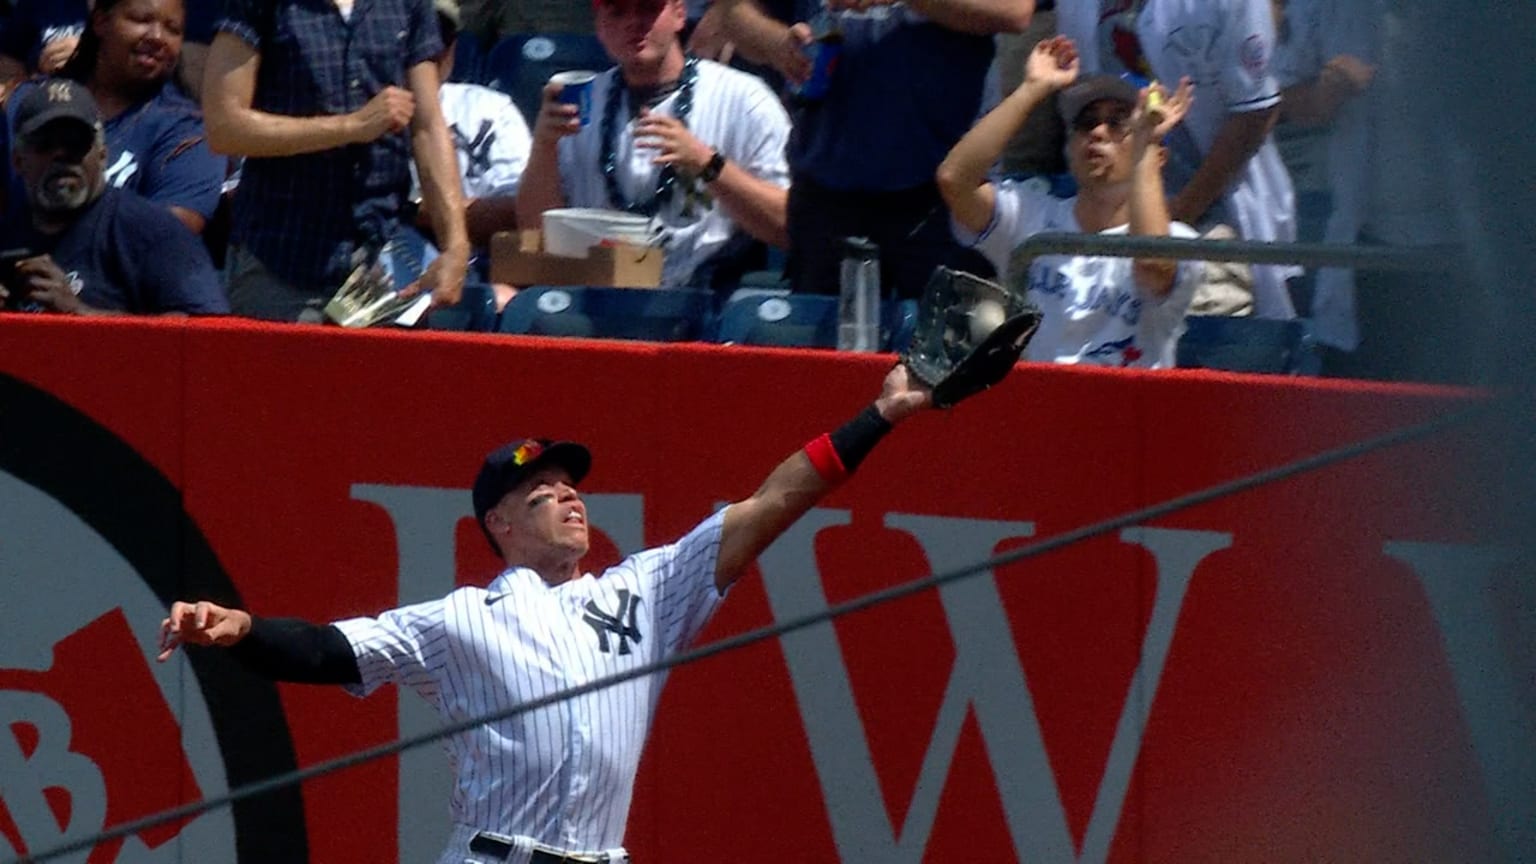 New York Yankees right fielder Aaron Judge catches a fly ball in the fourth  inning against the Chicago White Sox during a baseball game, Thursday, Aug.  12, 2021 in Dyersville, Iowa. The